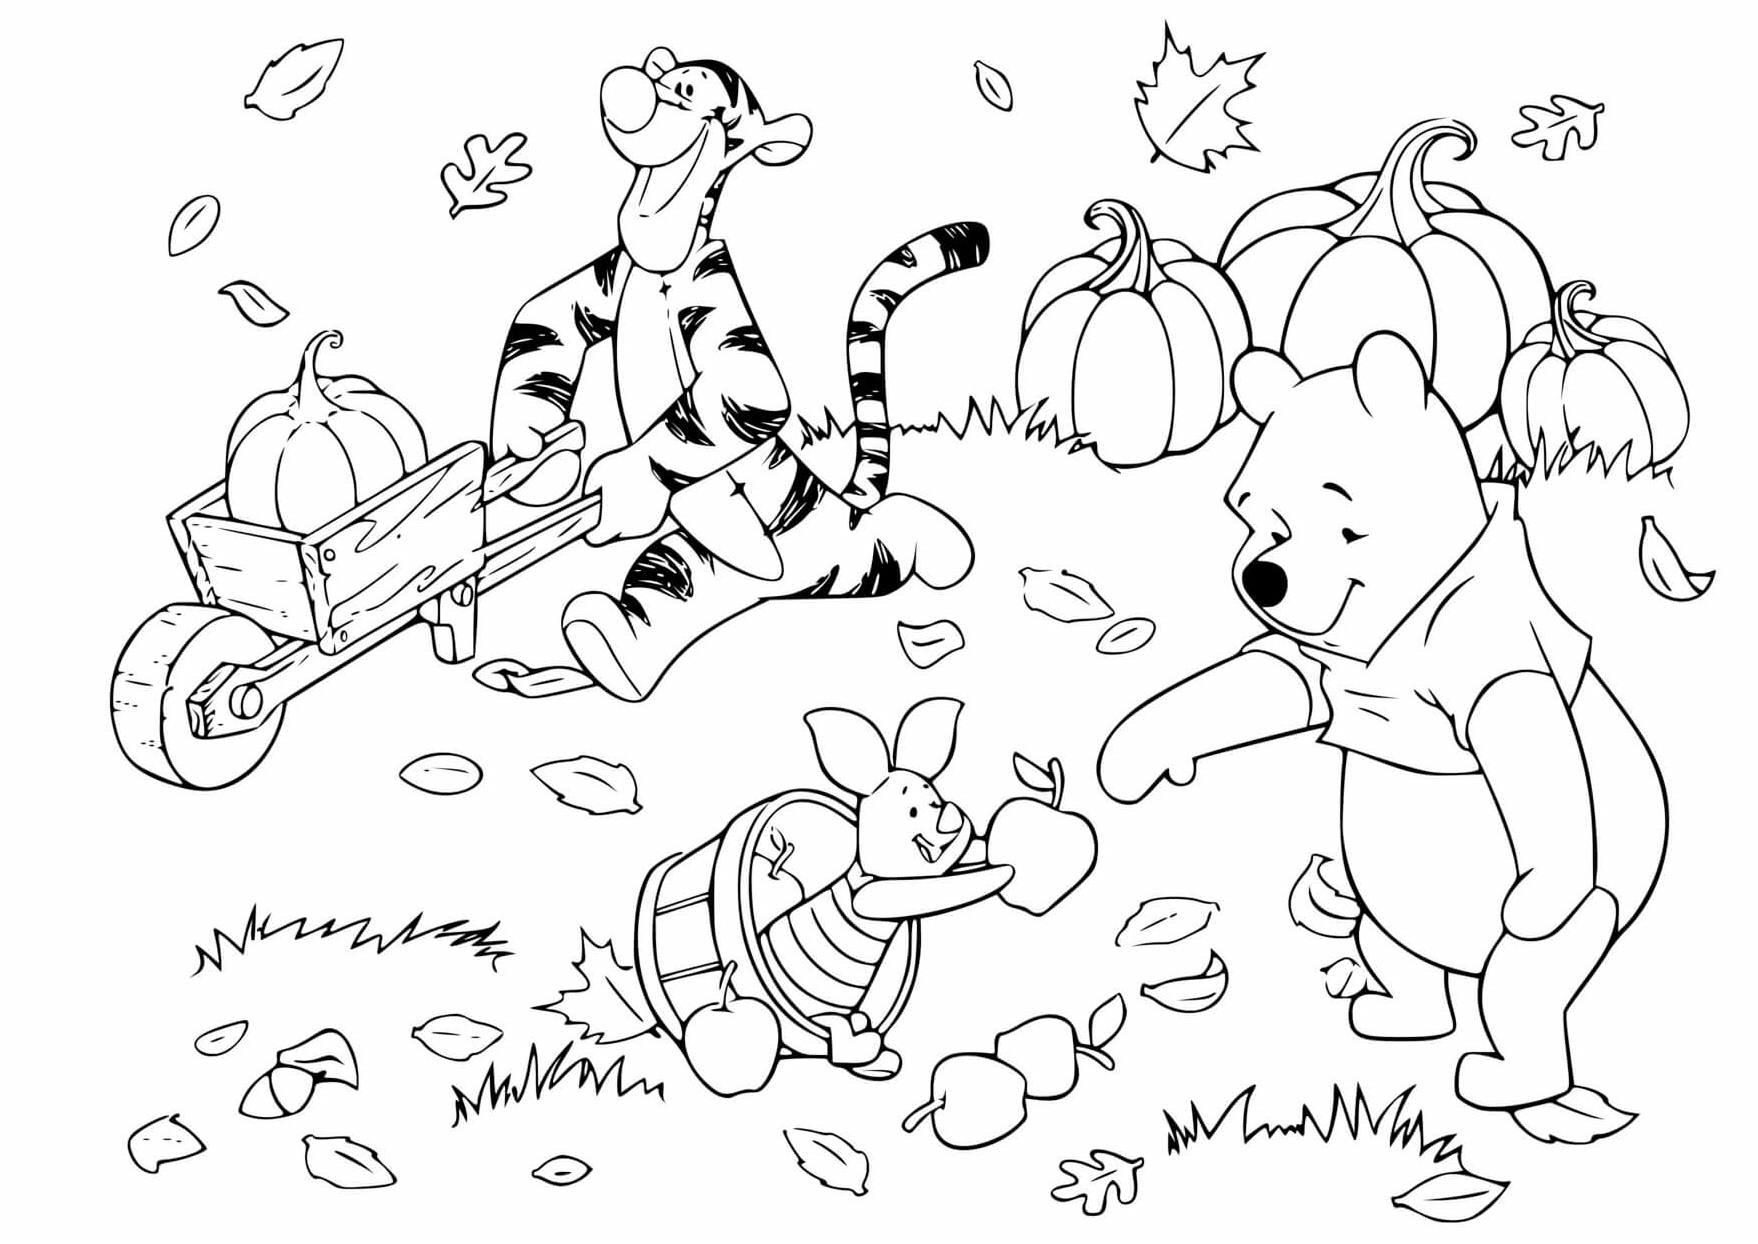 Pick Up The Autumn Leaves With A Rake Coloring Page